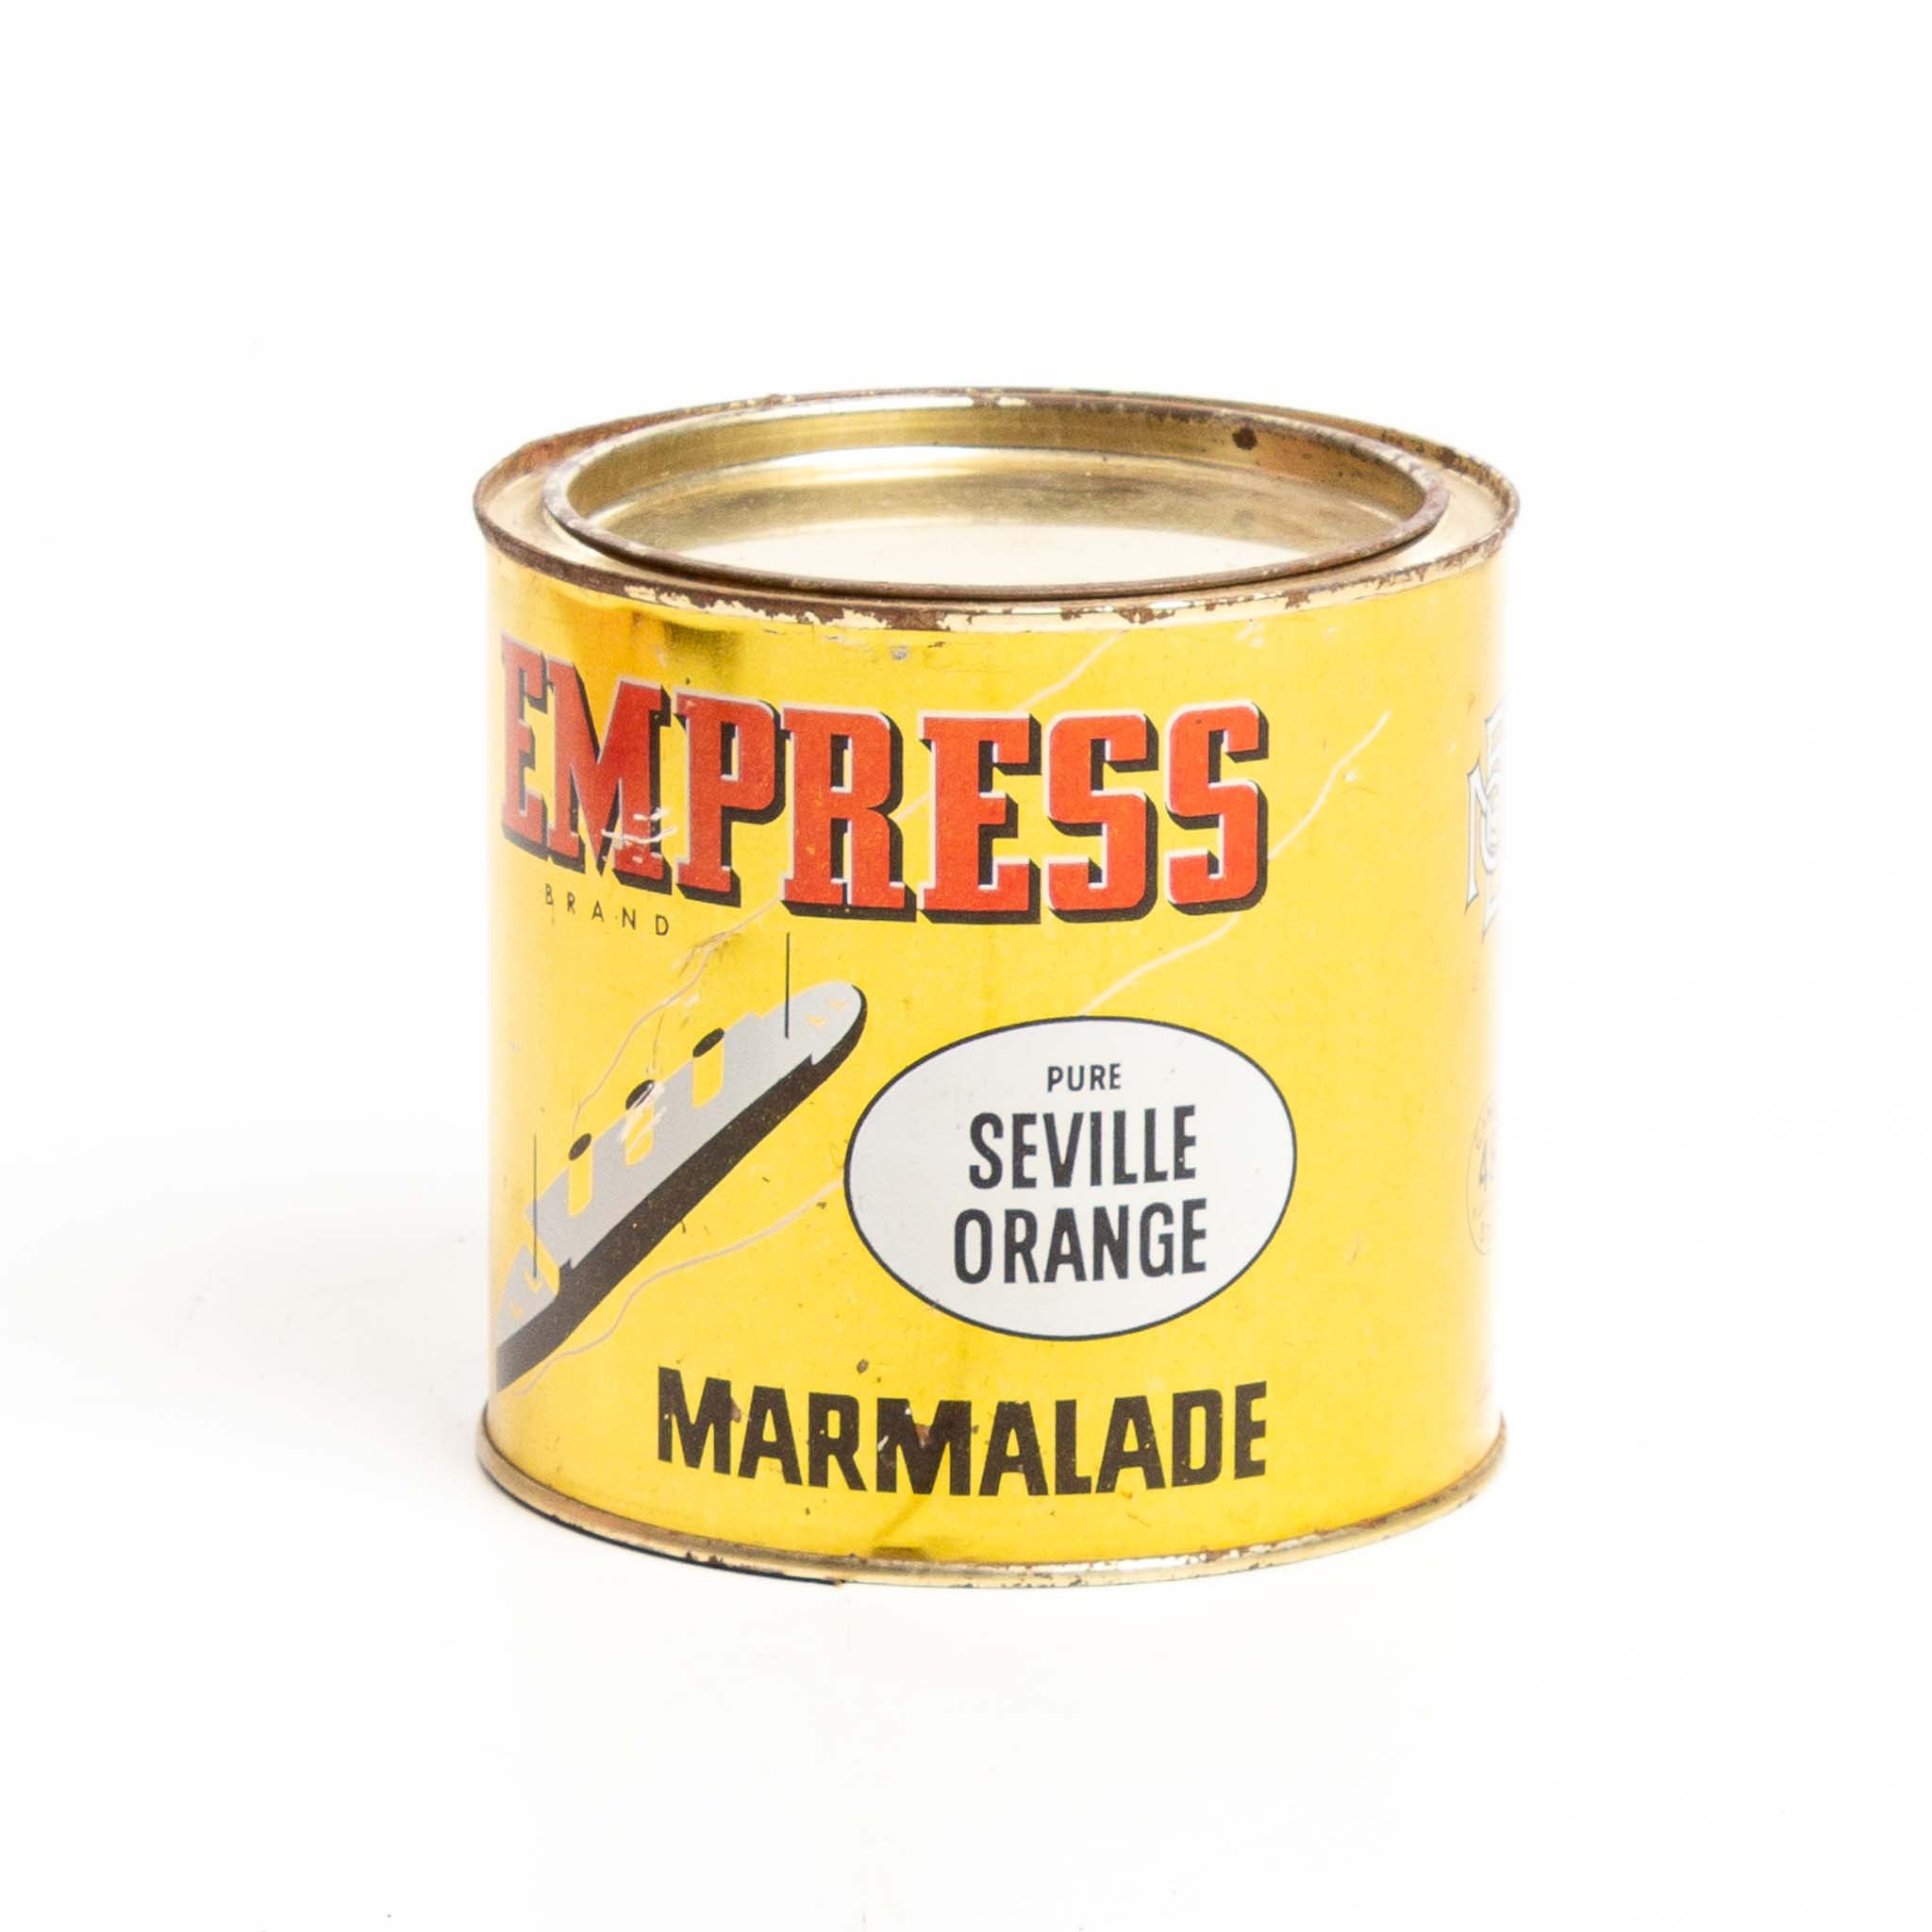 Aym On Marmalade  The Internet's Best Brands